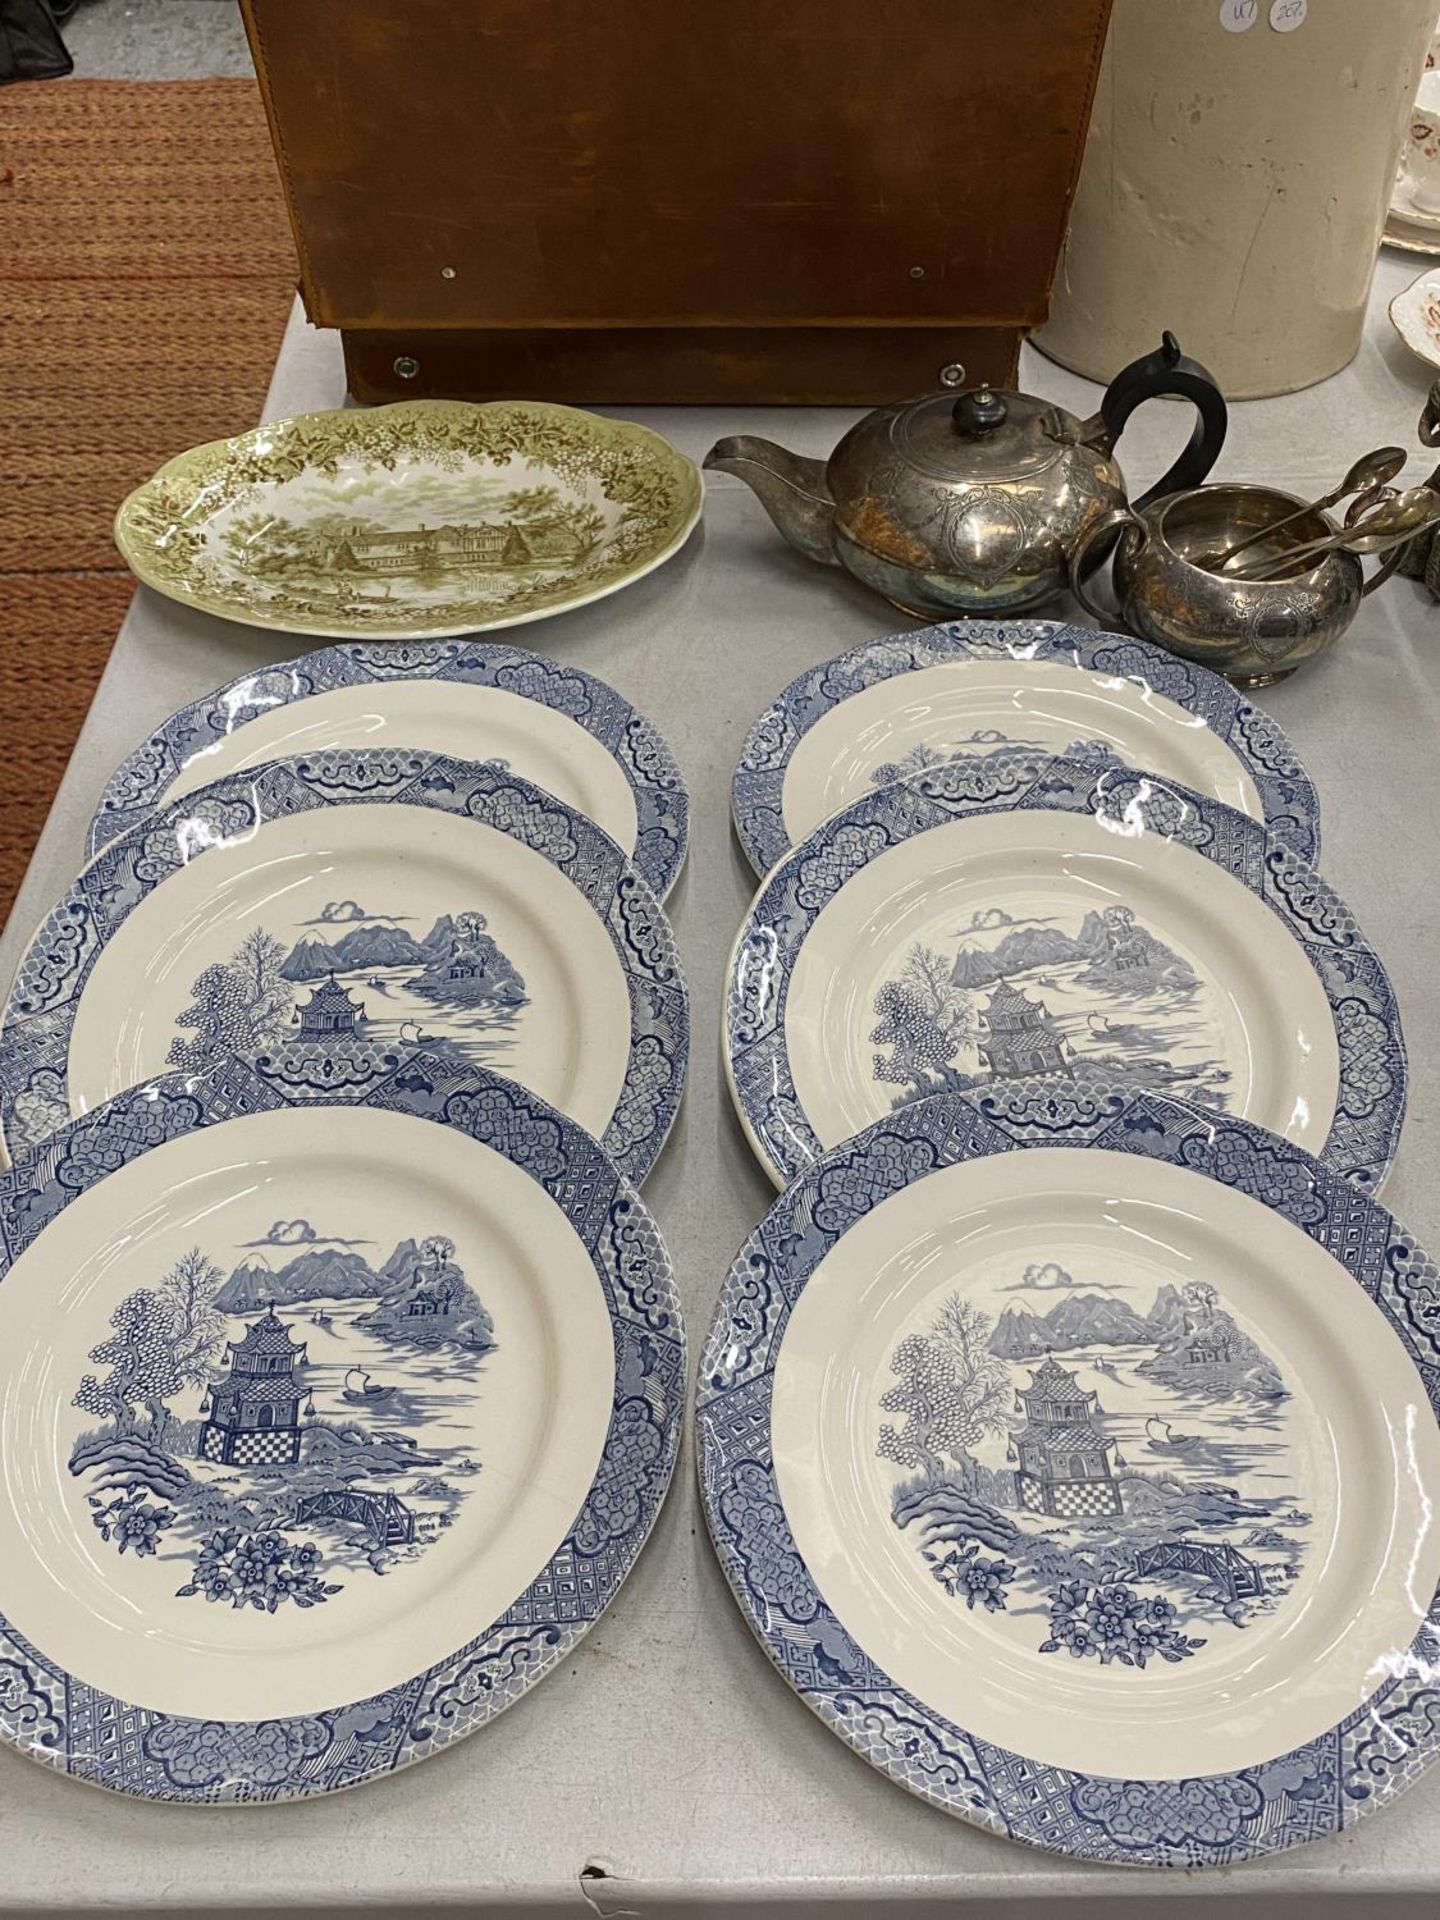 SIX VINTAGE WILLOW PATTERN PLATES, A MEAKIN 'ROMANTIC ENGLAND' SERVING PLATE PLUS A SILVER PLATED